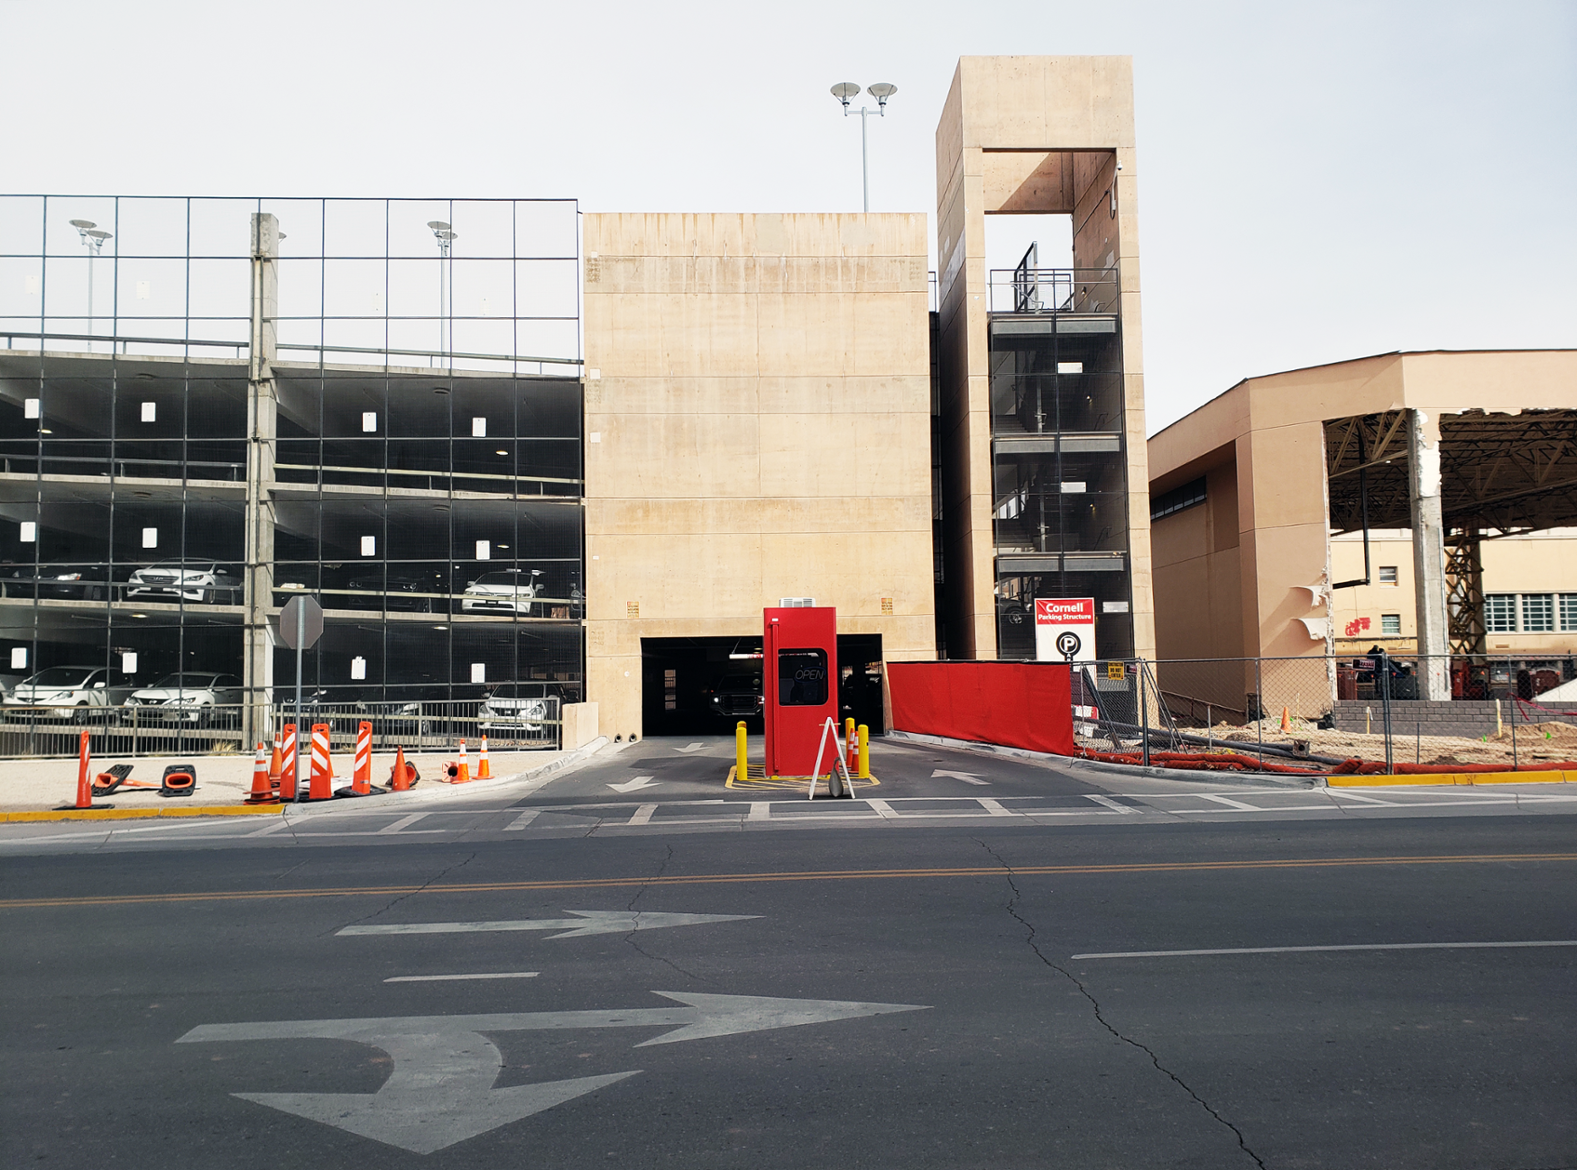 Entrance to Cornell parking structure with construction barricades